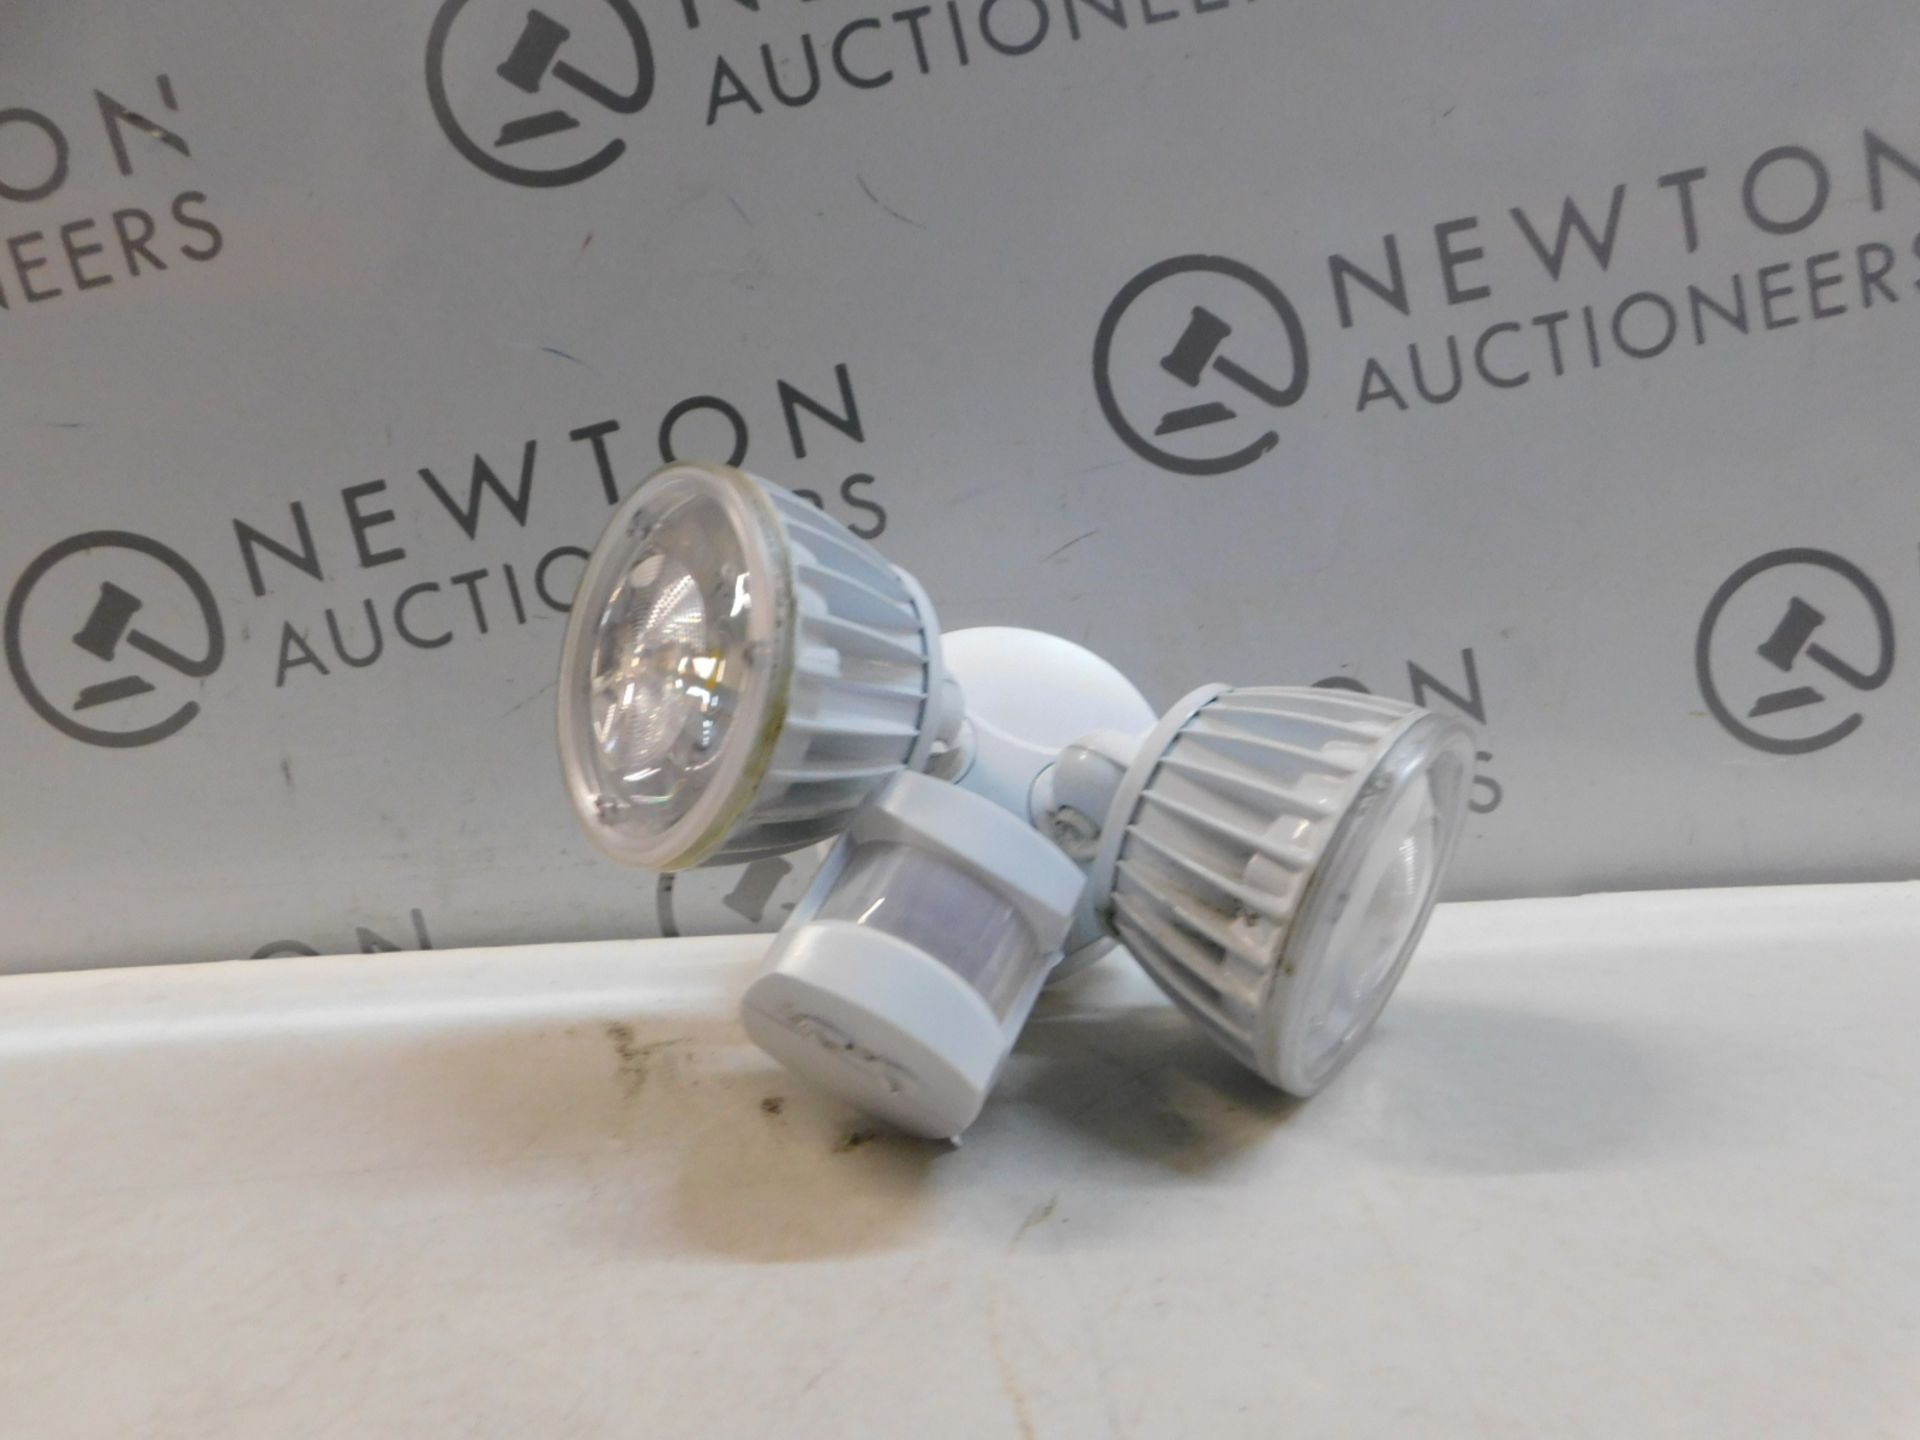 1 NIGHTWATCHER MOTION ACTIVATED SECURITY LIGHT RRP Â£89.99